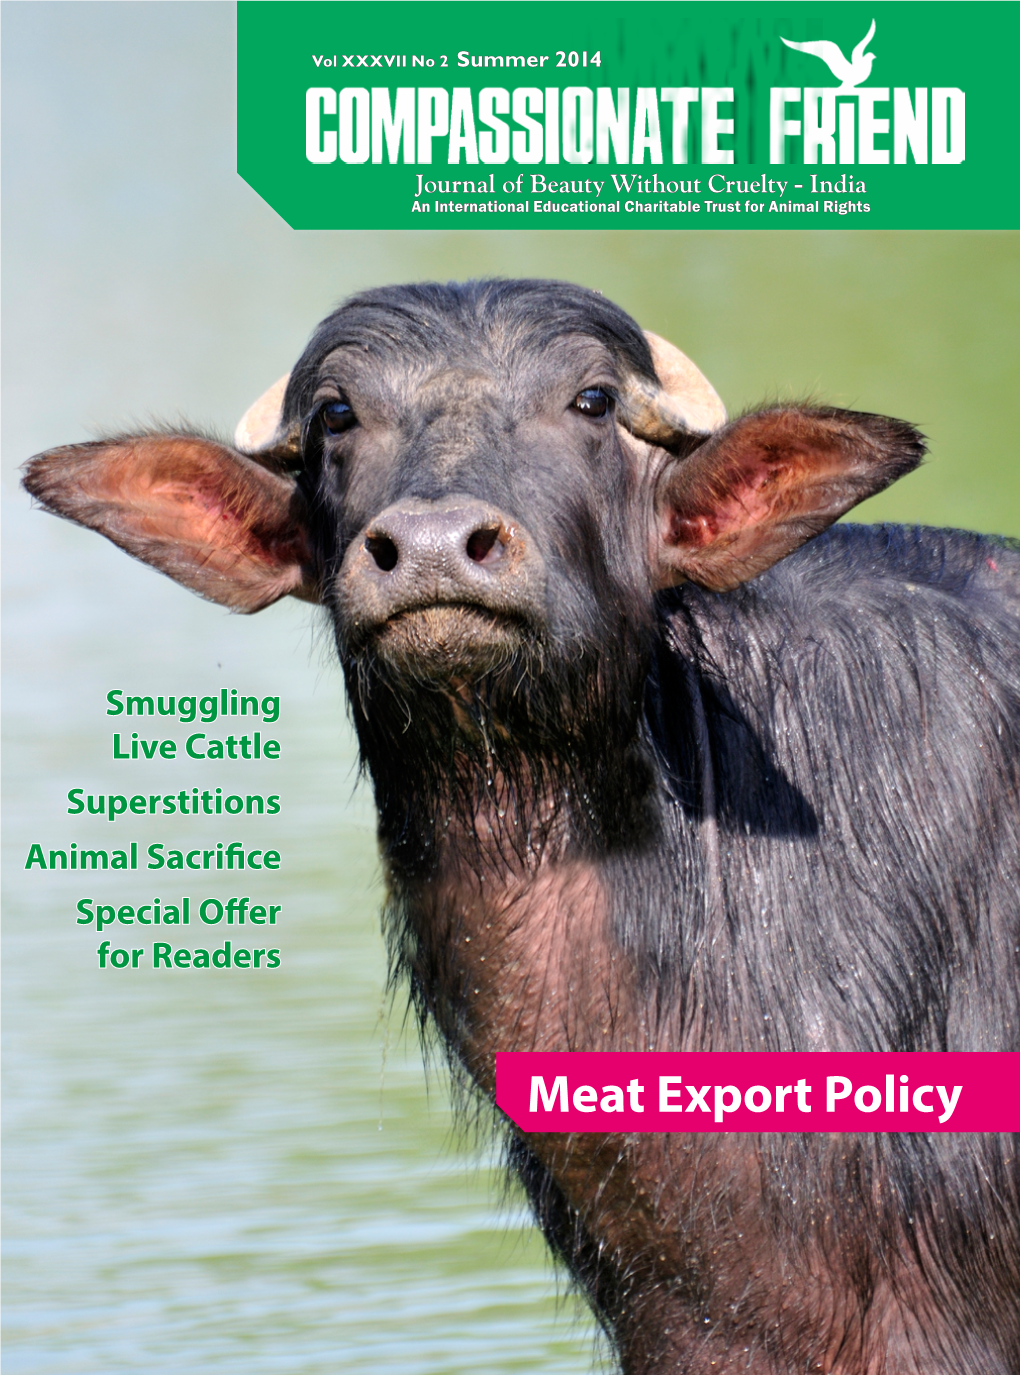 Meat Export Policy